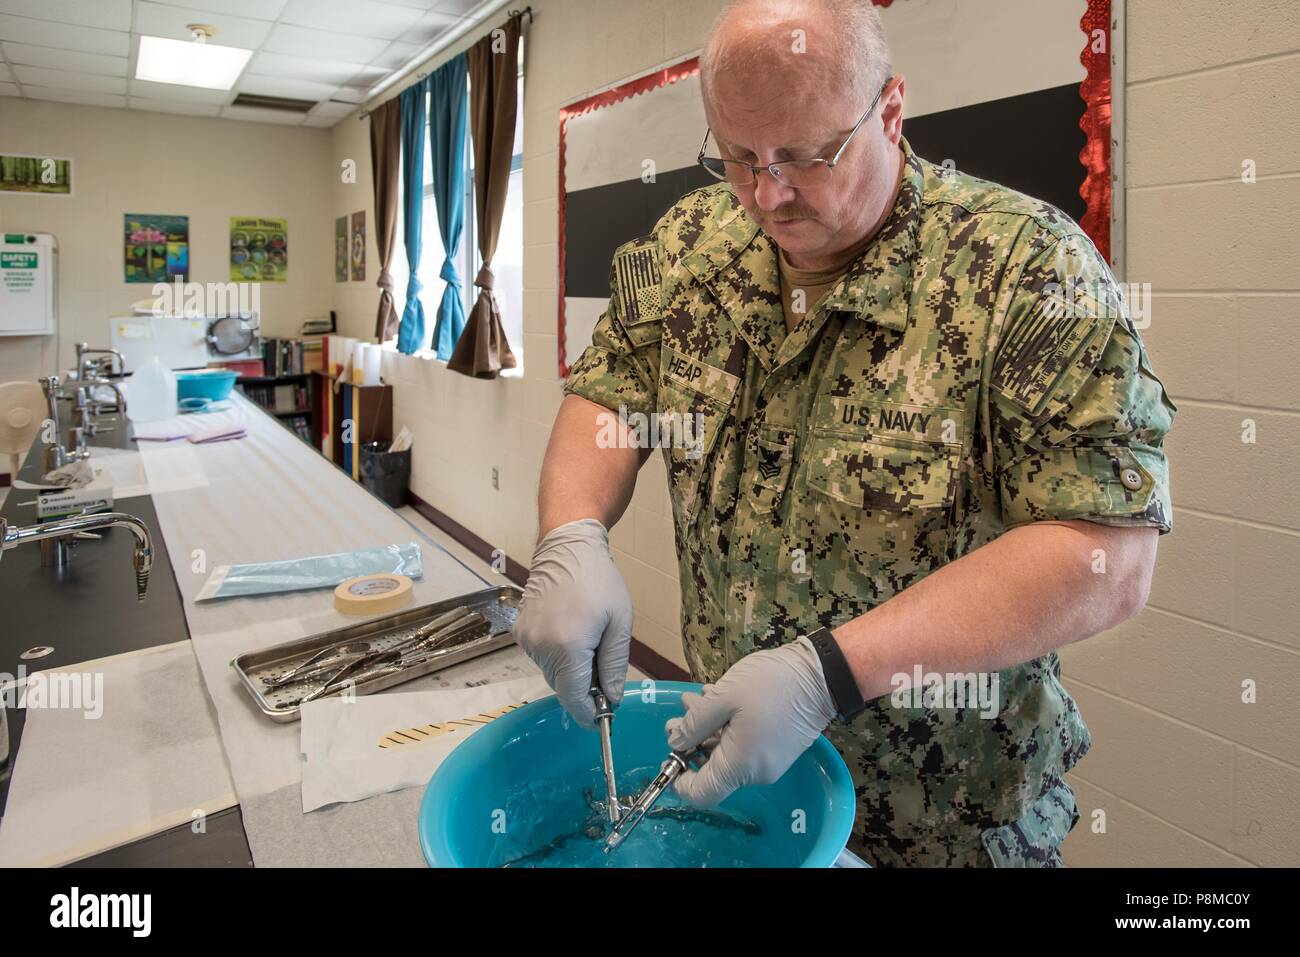 U.S. Navy HM1 Billy Joe Heap, a corpsman from Expeditionary Medical Facility Dallas, sterilizes dental instruments at a health-care clinic at Owsley County High School in Booneville, Ky. June 24, 2018, June 24, 2018. The clinic is one of four that comprised Operation Bobcat, a 10-day mission to provide military medical troops with crucial training in field operations and logistics while offering no-cost health care to the residents of Eastern Kentucky. The clinics, which operated from June 15-24, offered non-emergent medical care, sports physicals, dental cleanings, fillings and extractions, e Stock Photo